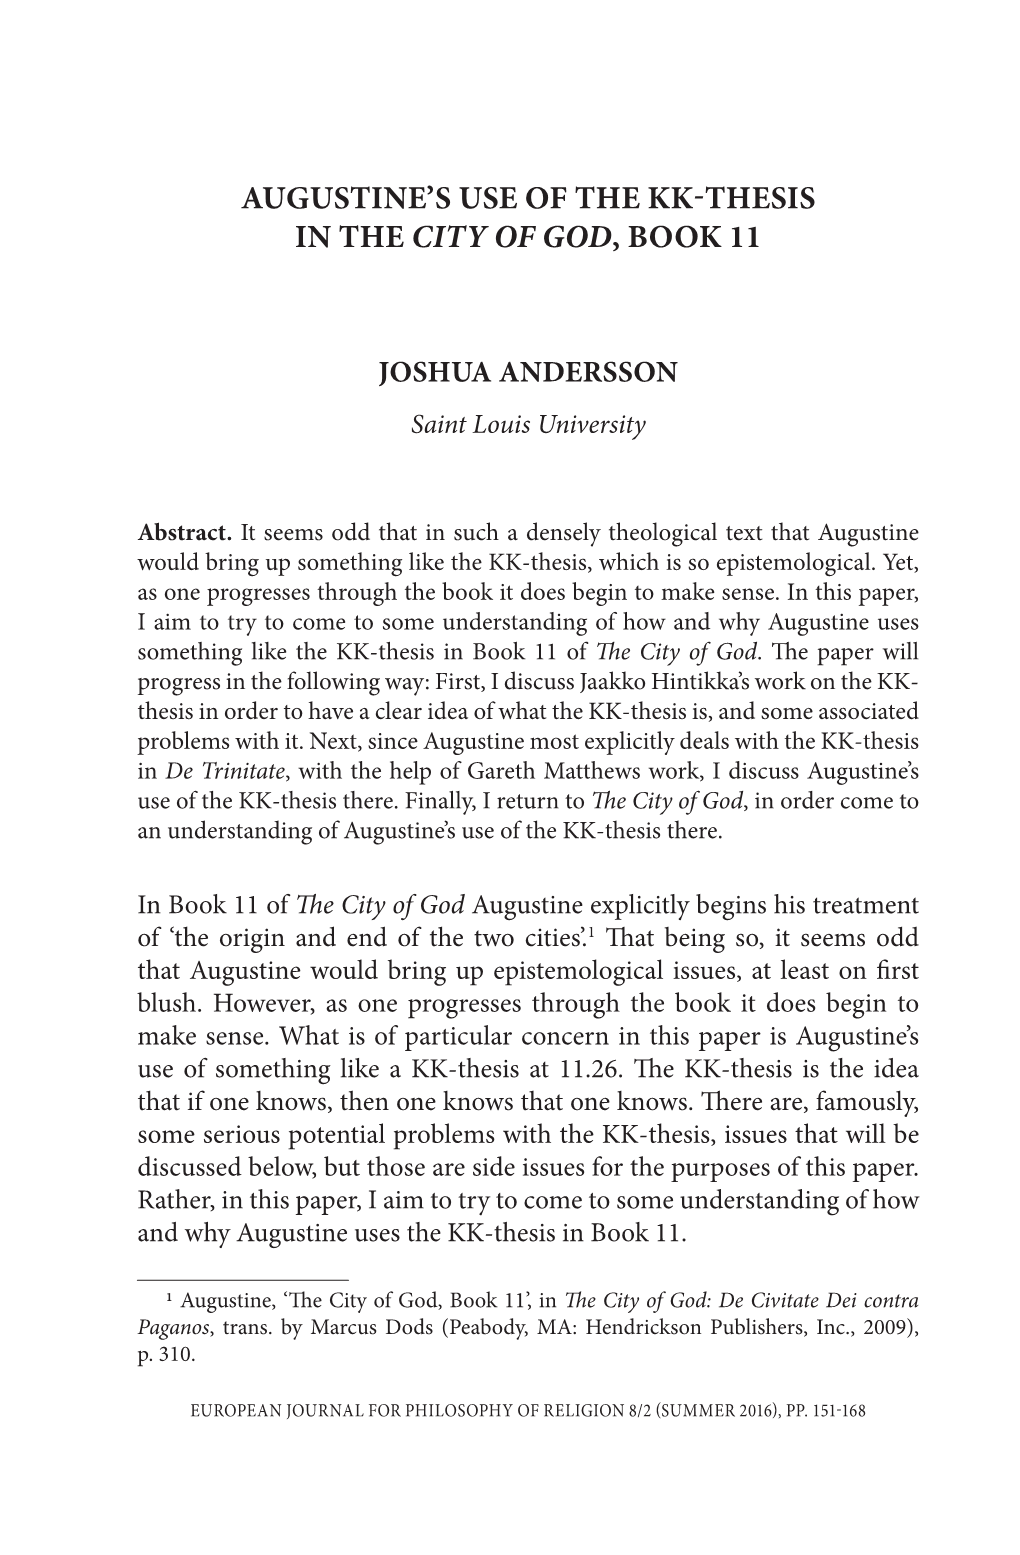 Augustine's Use of the Kk-Thesis in the City of God, Book 11